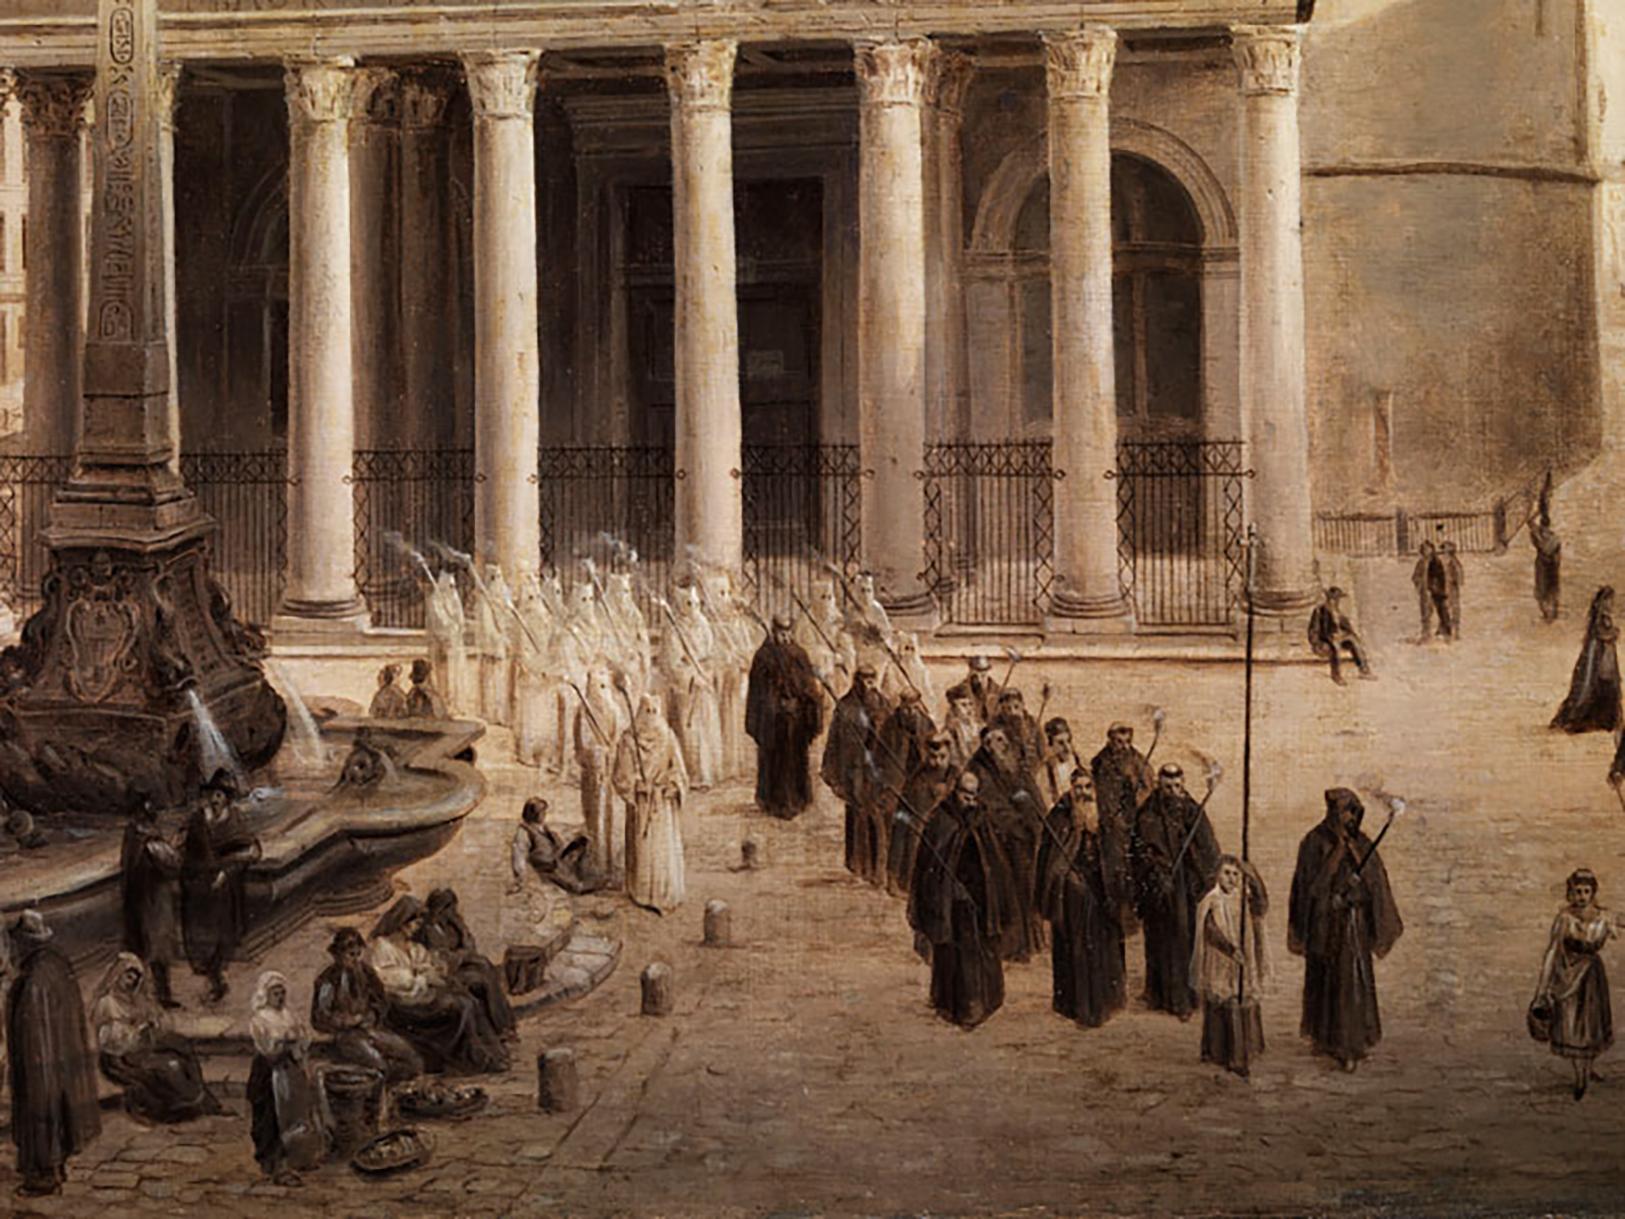 View from elevated view of the Pantheon to the front of it obelisk fountain and a pulling of the square procession of monks in brown robes, followed by Gugel men in white, head covered robes with flaming torches. At the edge of the well and to the